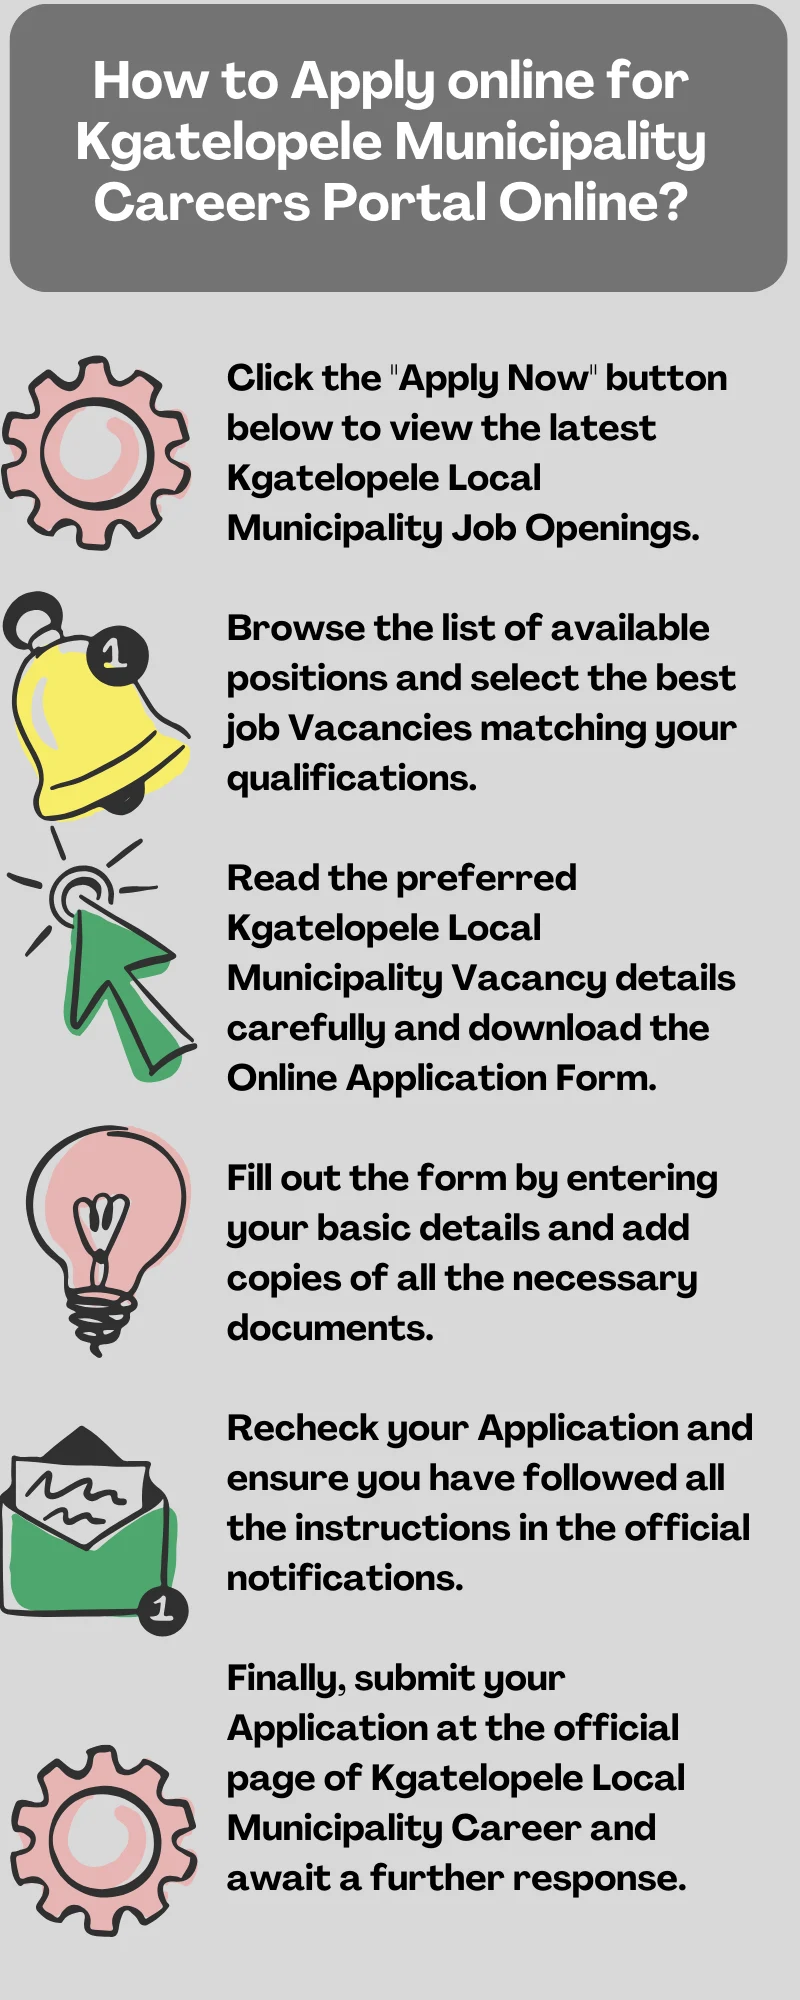 How to Apply online for Kgatelopele Municipality Careers Portal Online?